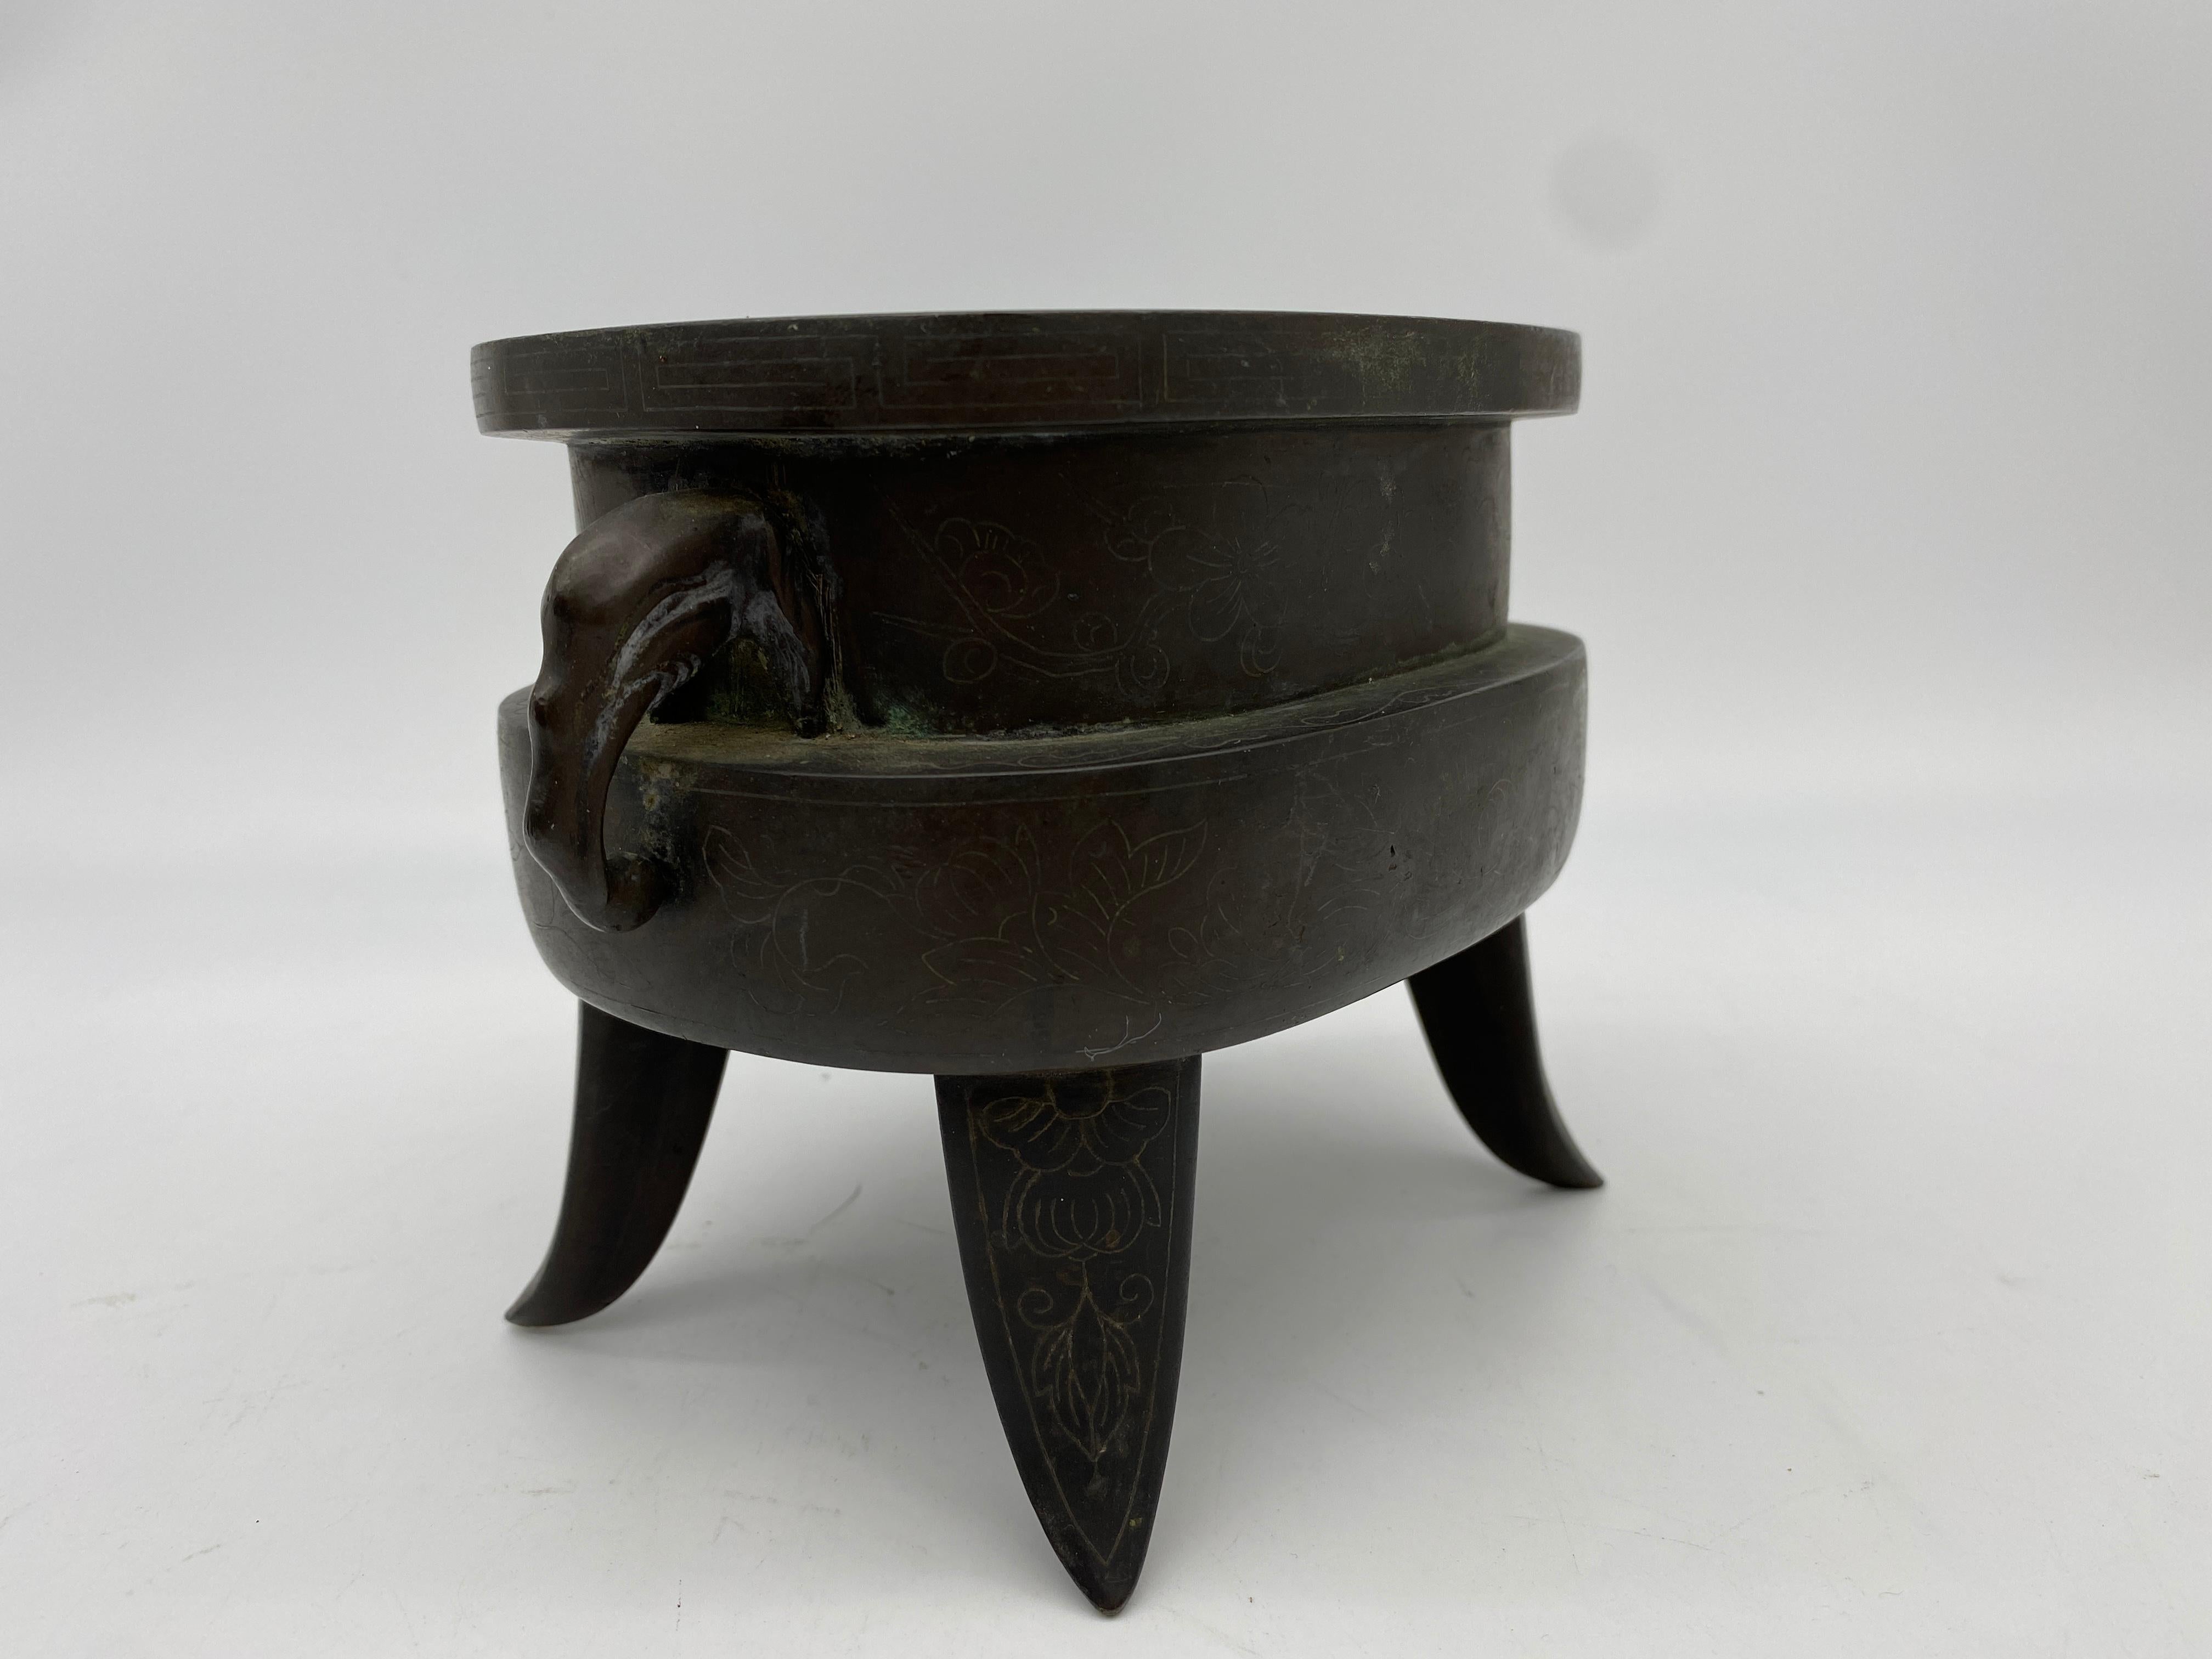 Antique Qing Dynasty Chinese Twin Handled Bronze Censer with Elephants Handles For Sale 6